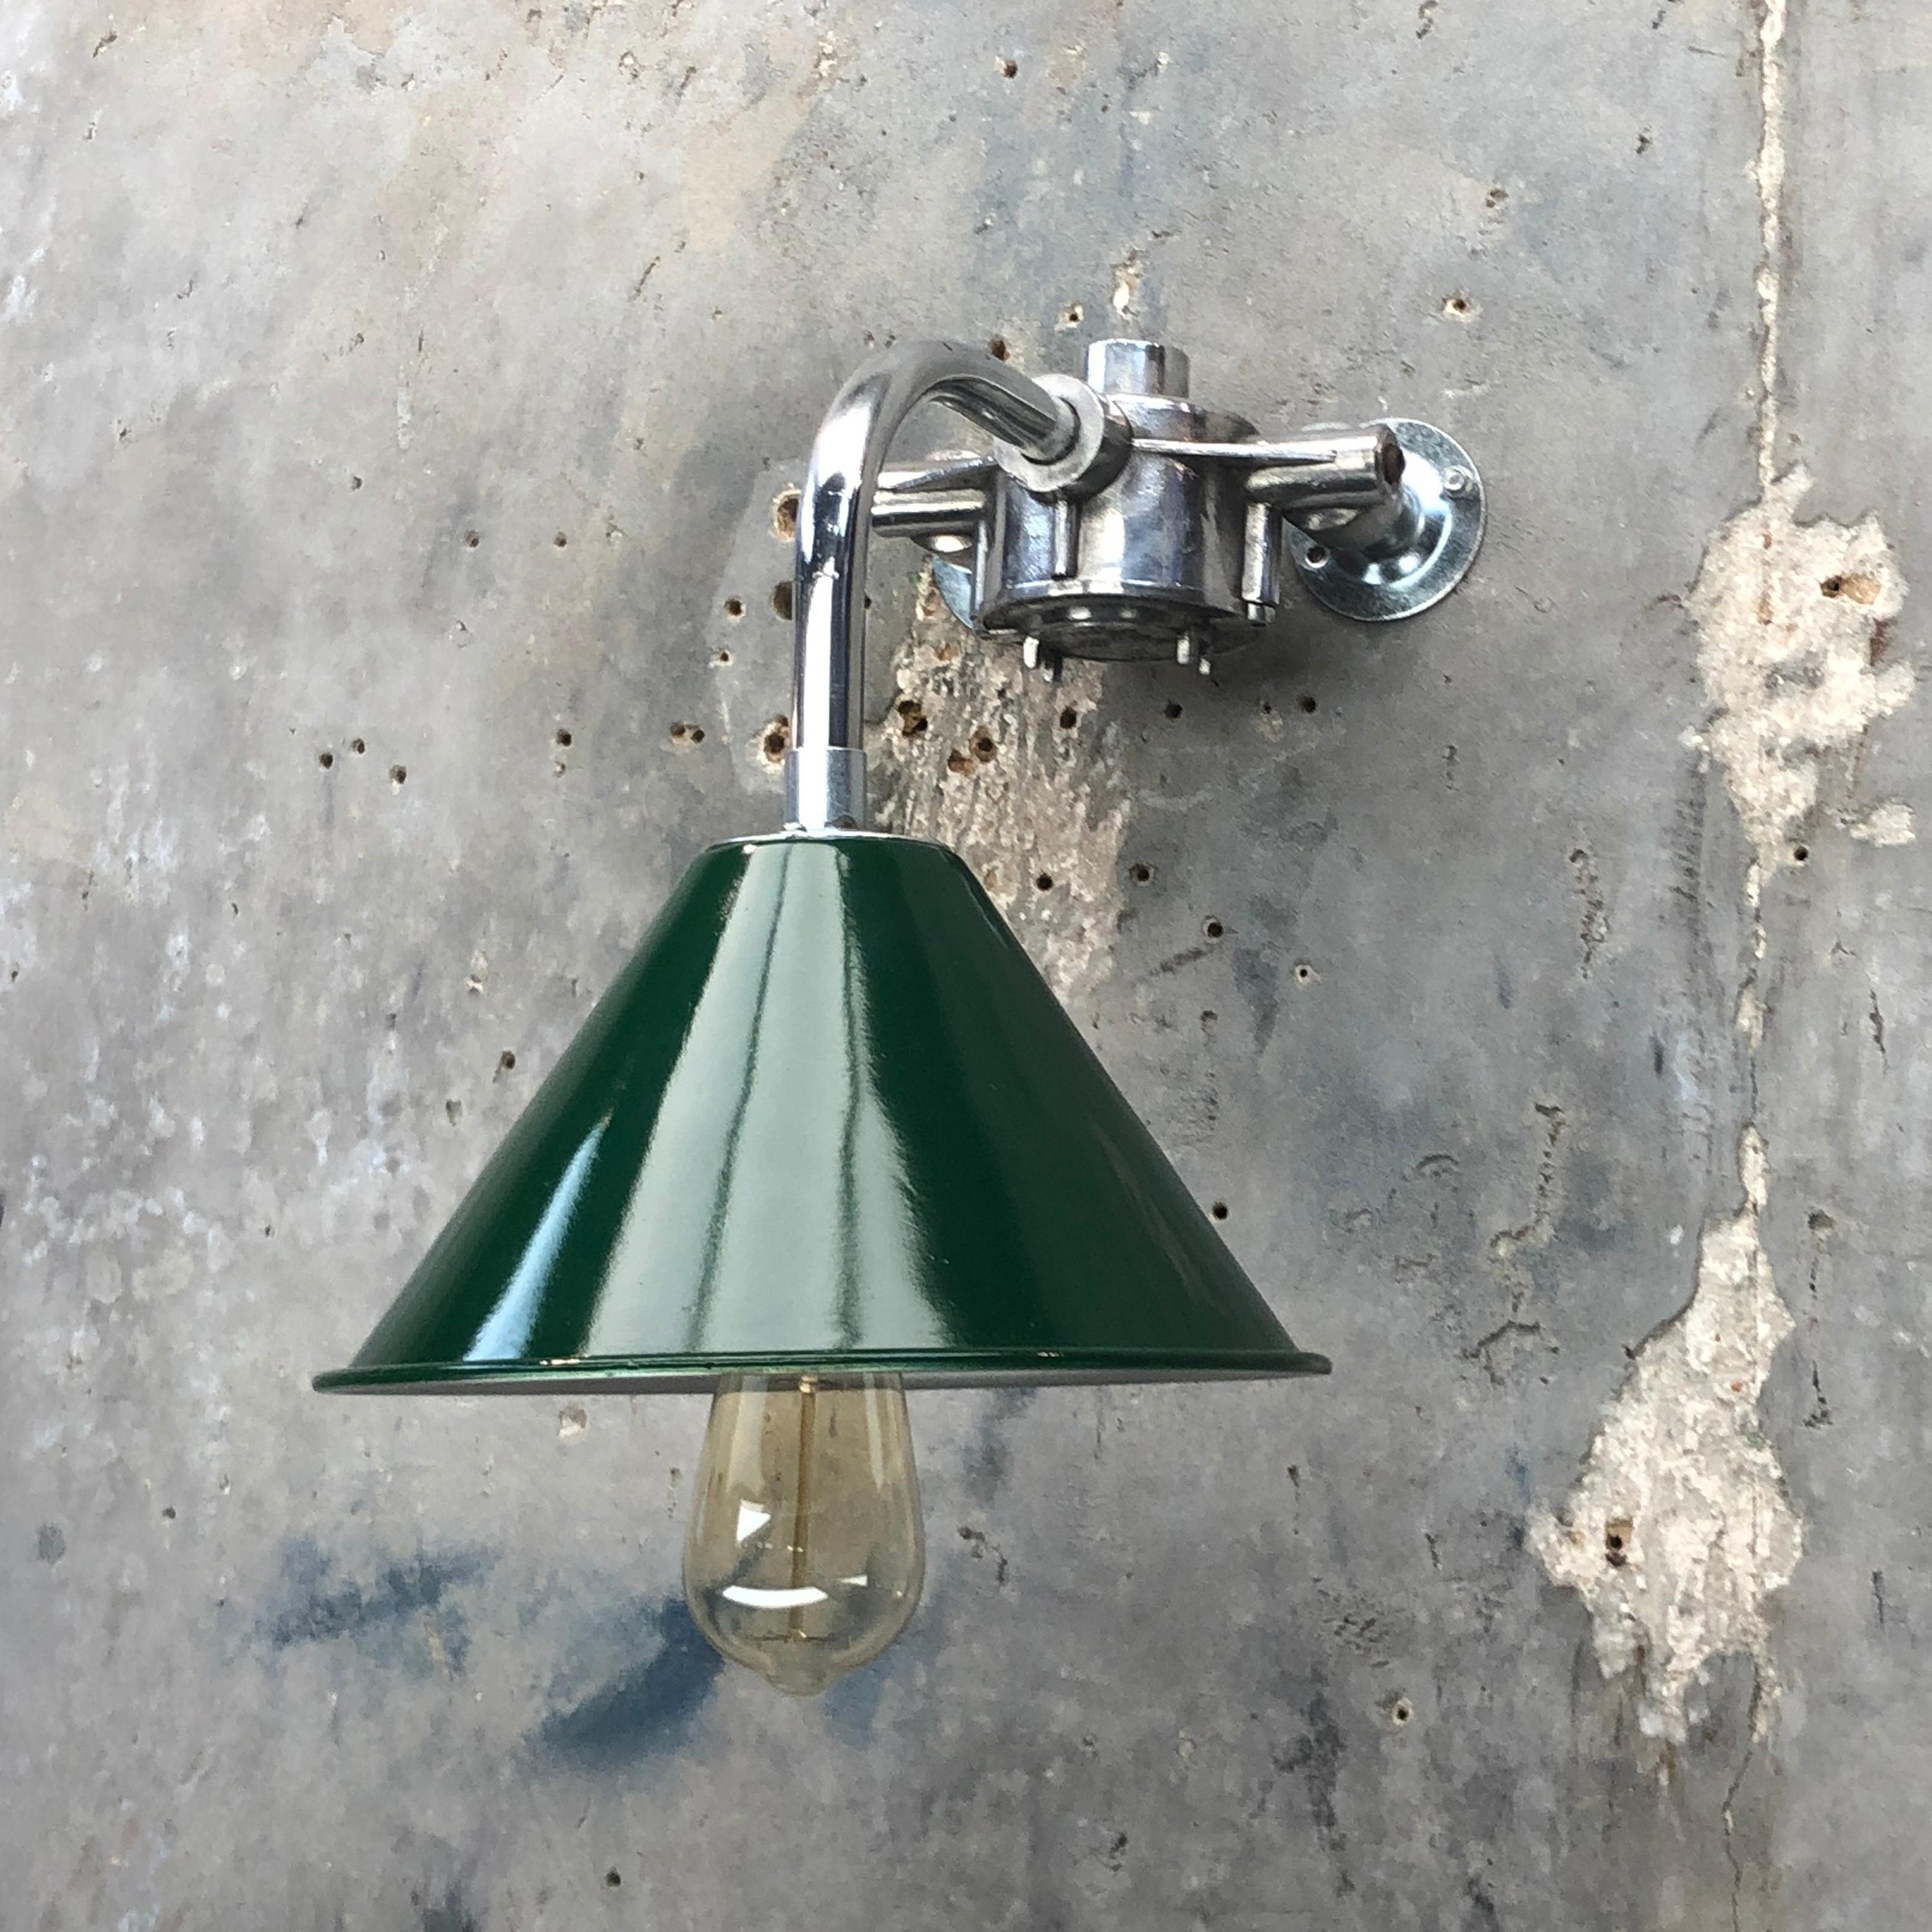 1980s Ex British Army Lamp Shade and Galvanized Steel Short Reach Cantilever For Sale 2